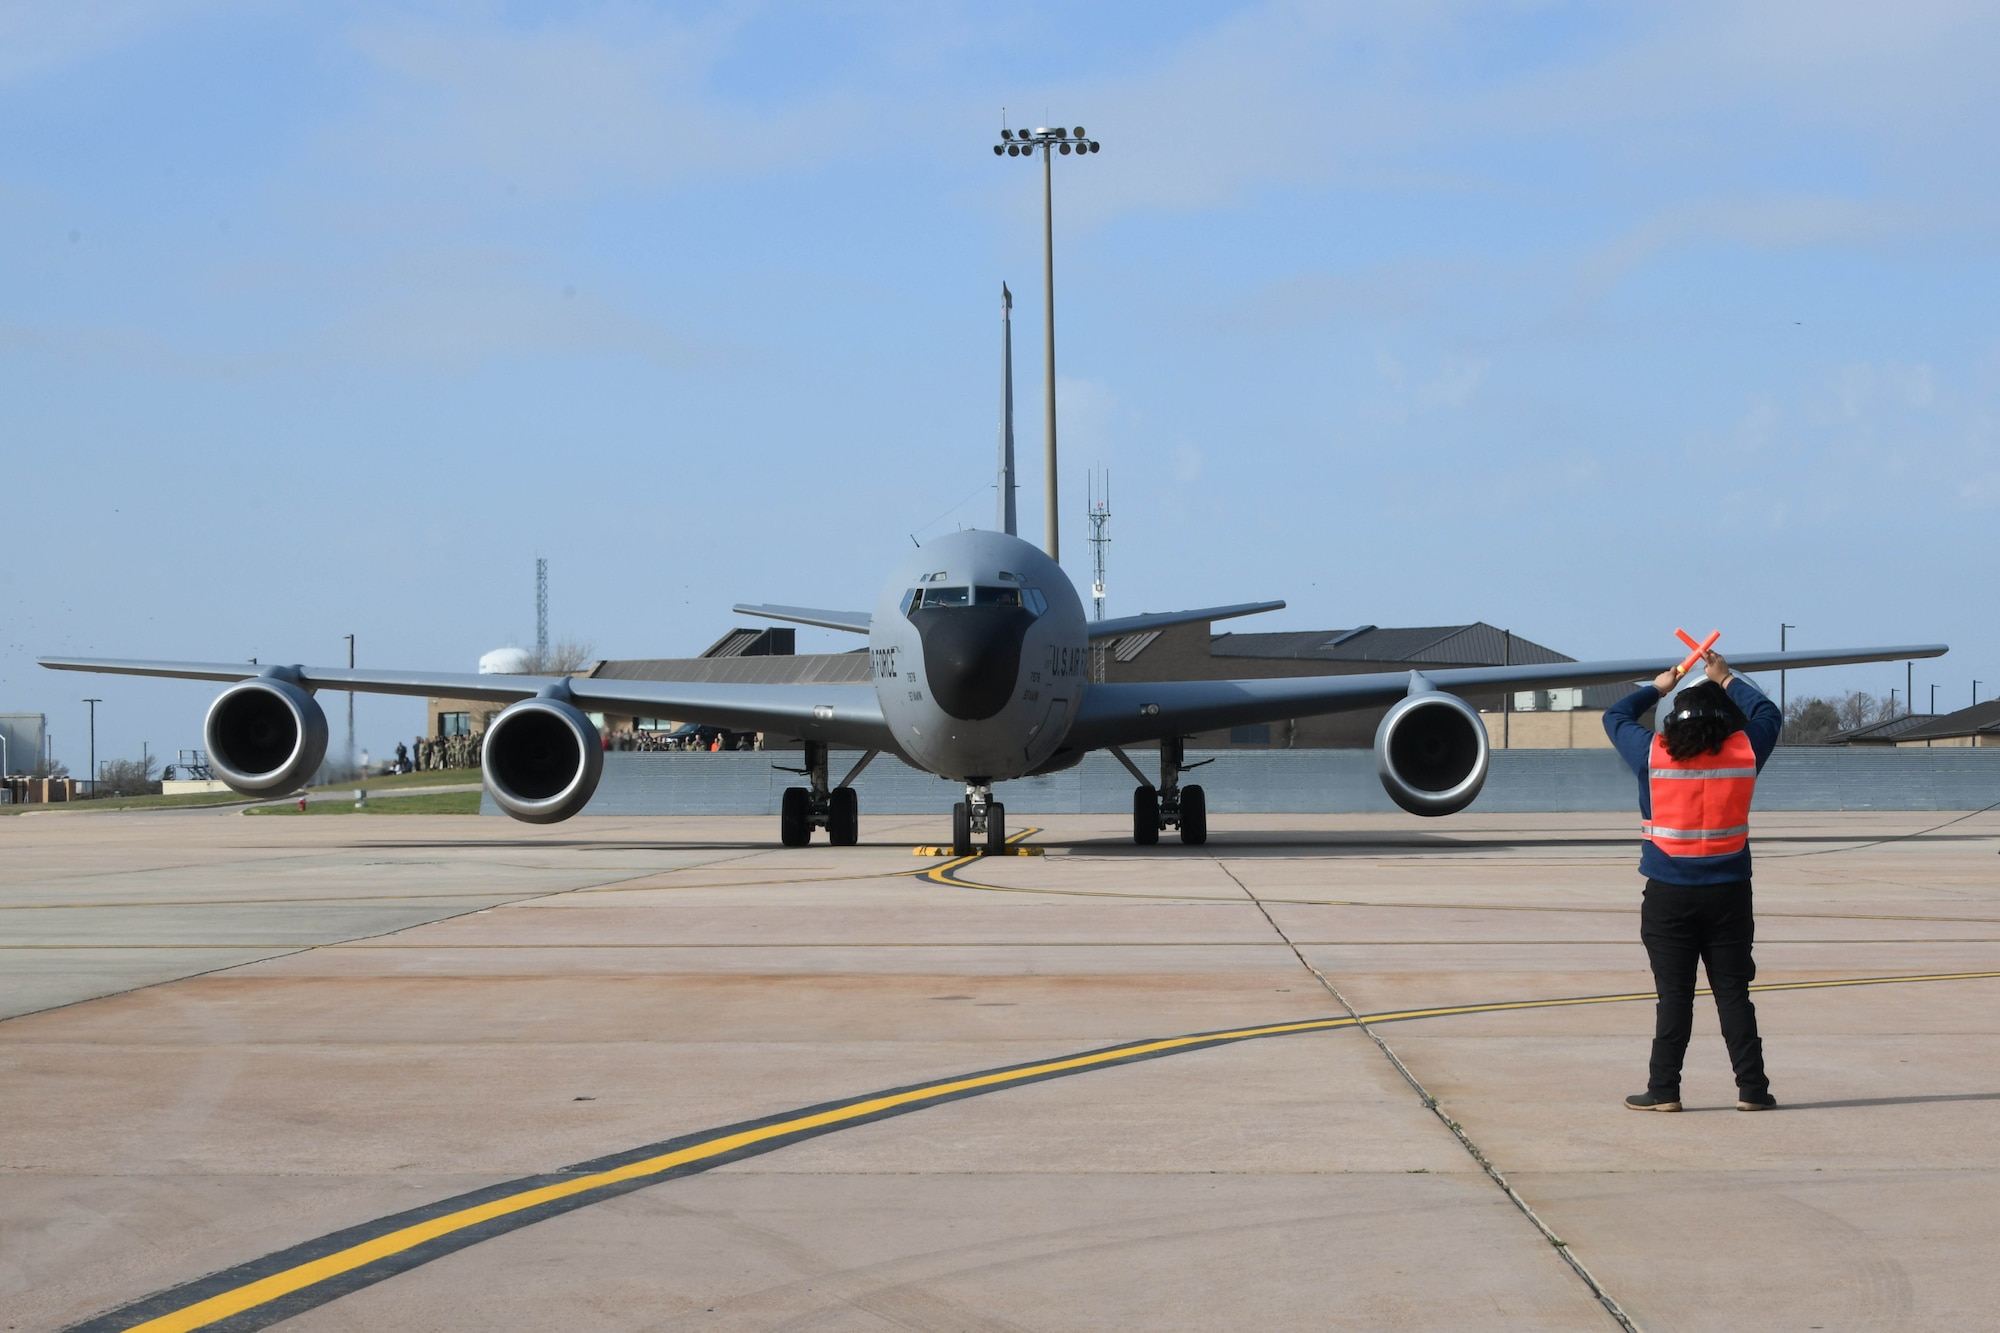 Andrew Gloria, 97th Aircraft Maintenance Squadron aircraft attendant, stands in front of a KC-135 Stratotanker during a large force exercise at Altus Air Force Base, Oklahoma, March 24, 2023. Airmen from the 97th Maintenance Group generated 20 aircraft for the exercise. (U.S. Air Force photo by Airman 1st Class Miyah Gray)